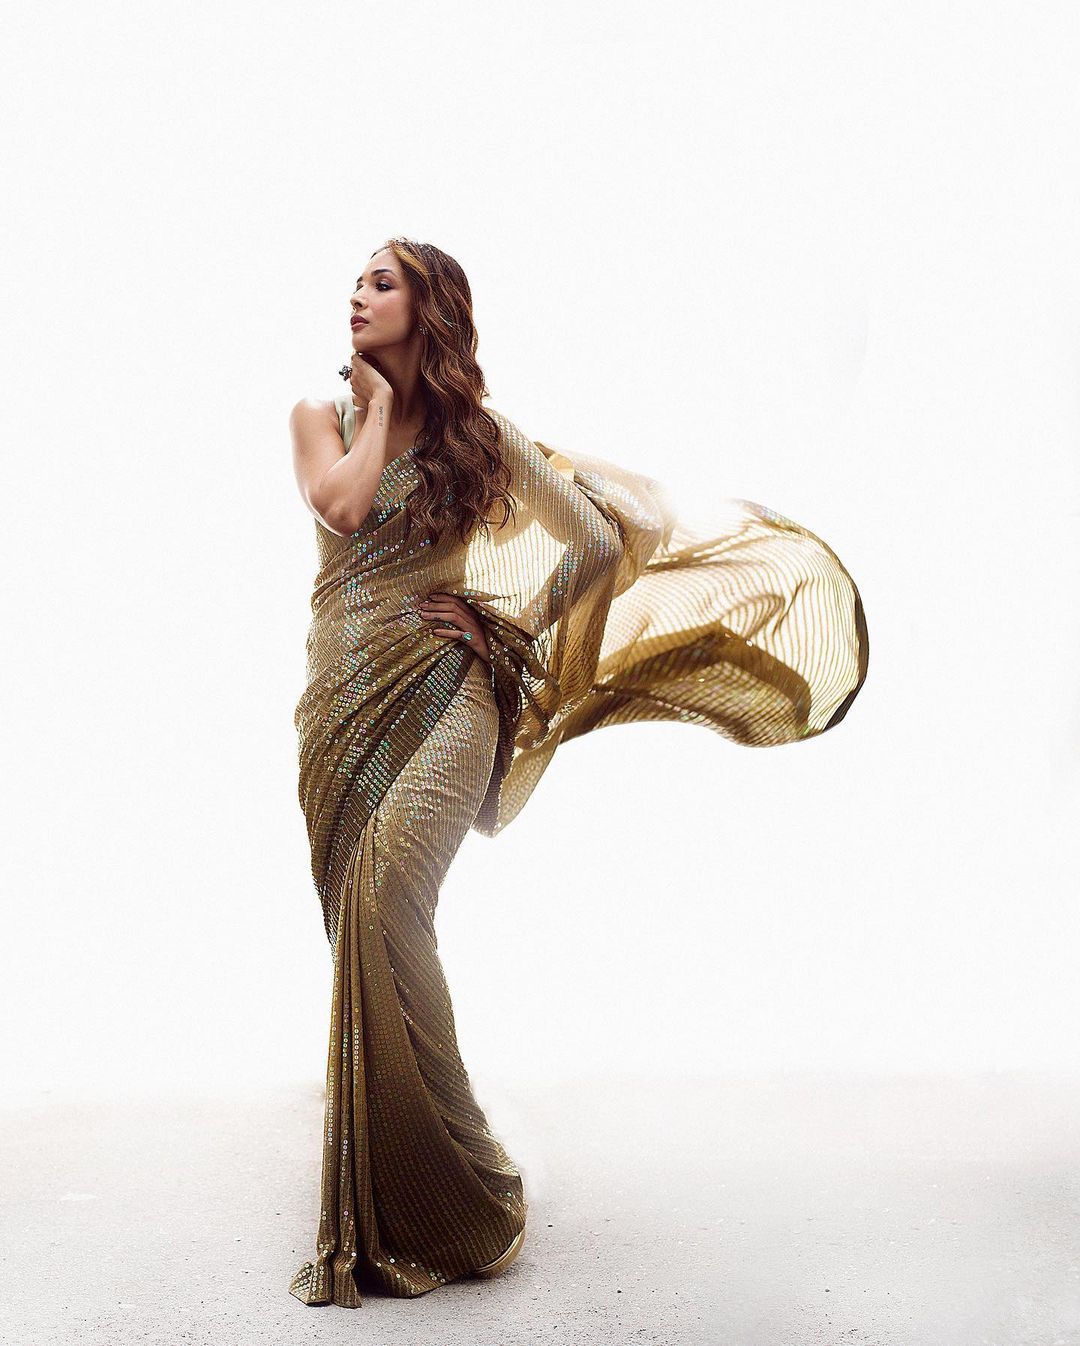 Malaika Arora looks gorgeous in the ombre sequinned saree.